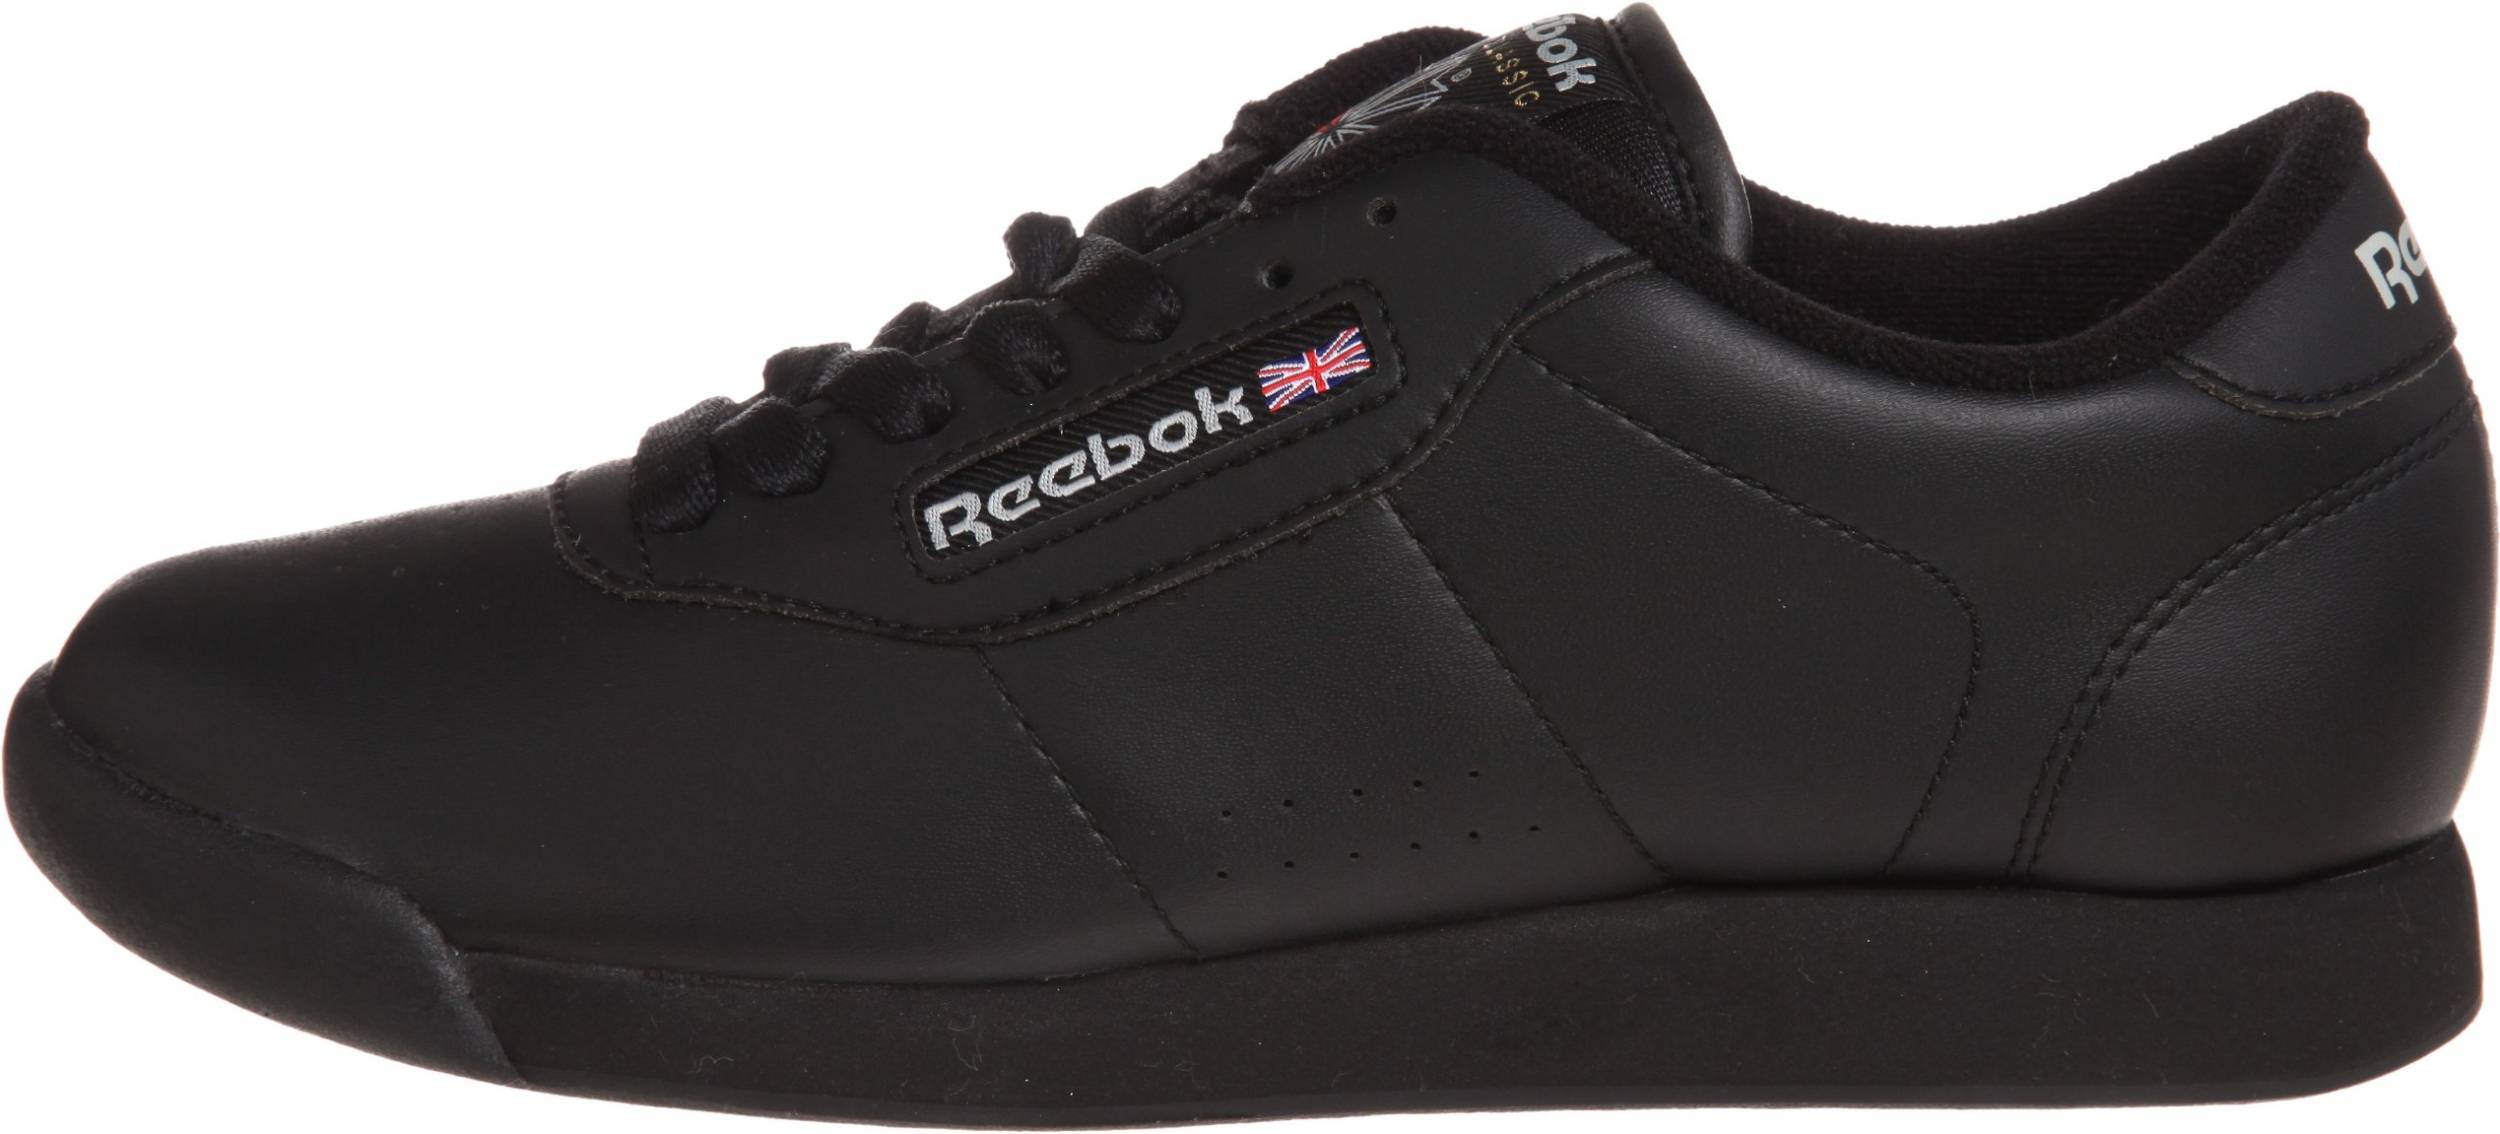 Only $33 + Review of Reebok Princess 